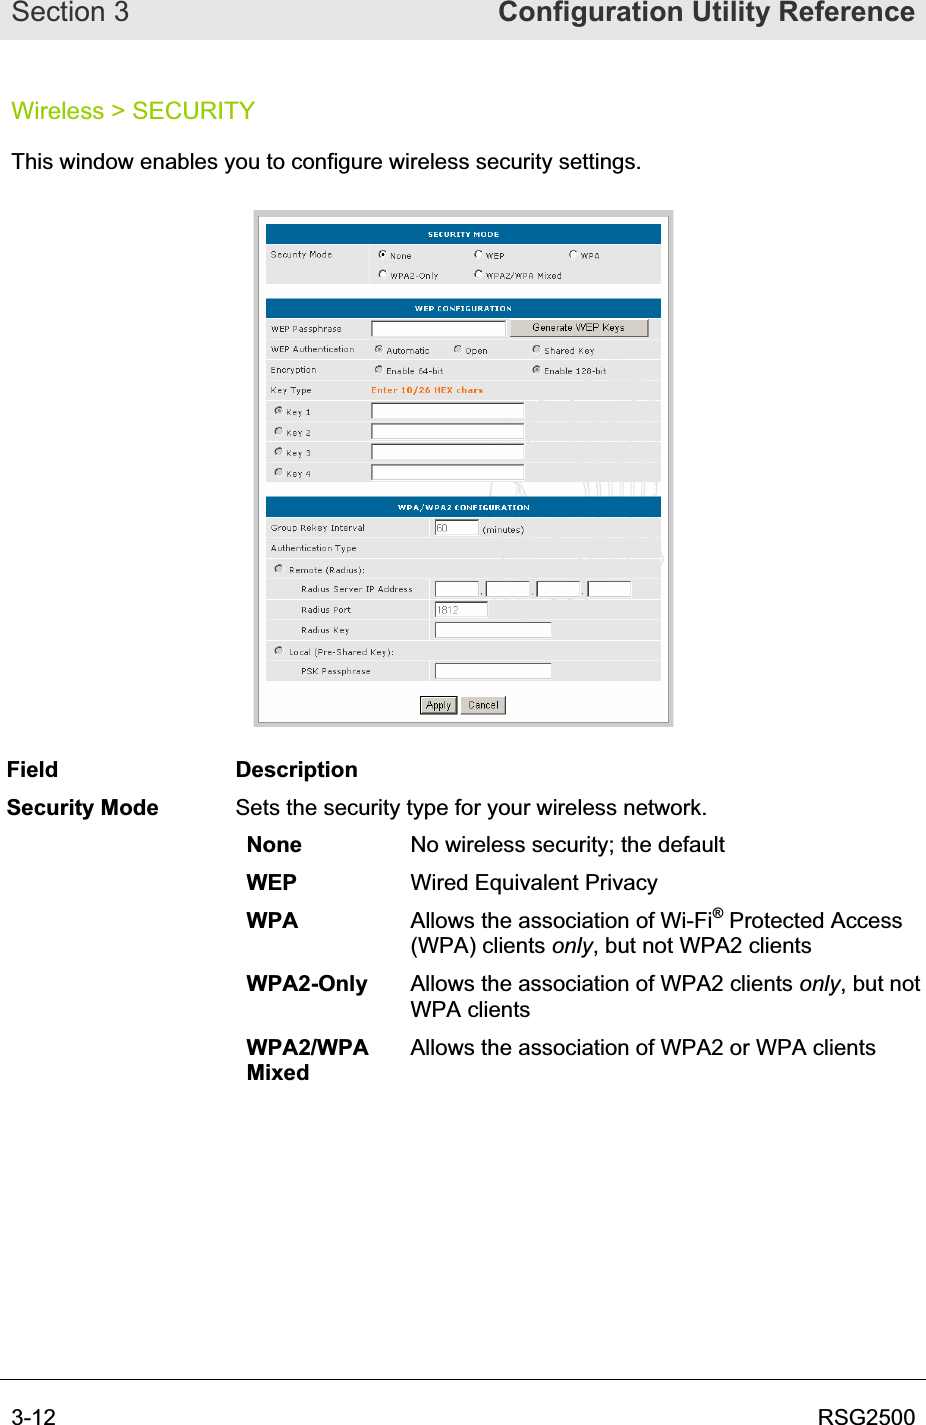 Section 3  Configuration Utility Reference3-12  RSG2500Wireless &gt; SECURITY This window enables you to configure wireless security settings. Field Description Security Mode  Sets the security type for your wireless network. None No wireless security; the default WEP Wired Equivalent Privacy WPA Allows the association of Wi-Fi® Protected Access (WPA) clients only, but not WPA2 clients WPA2-Only  Allows the association of WPA2 clients only, but not WPA clients WPA2/WPAMixedAllows the association of WPA2 or WPA clients 